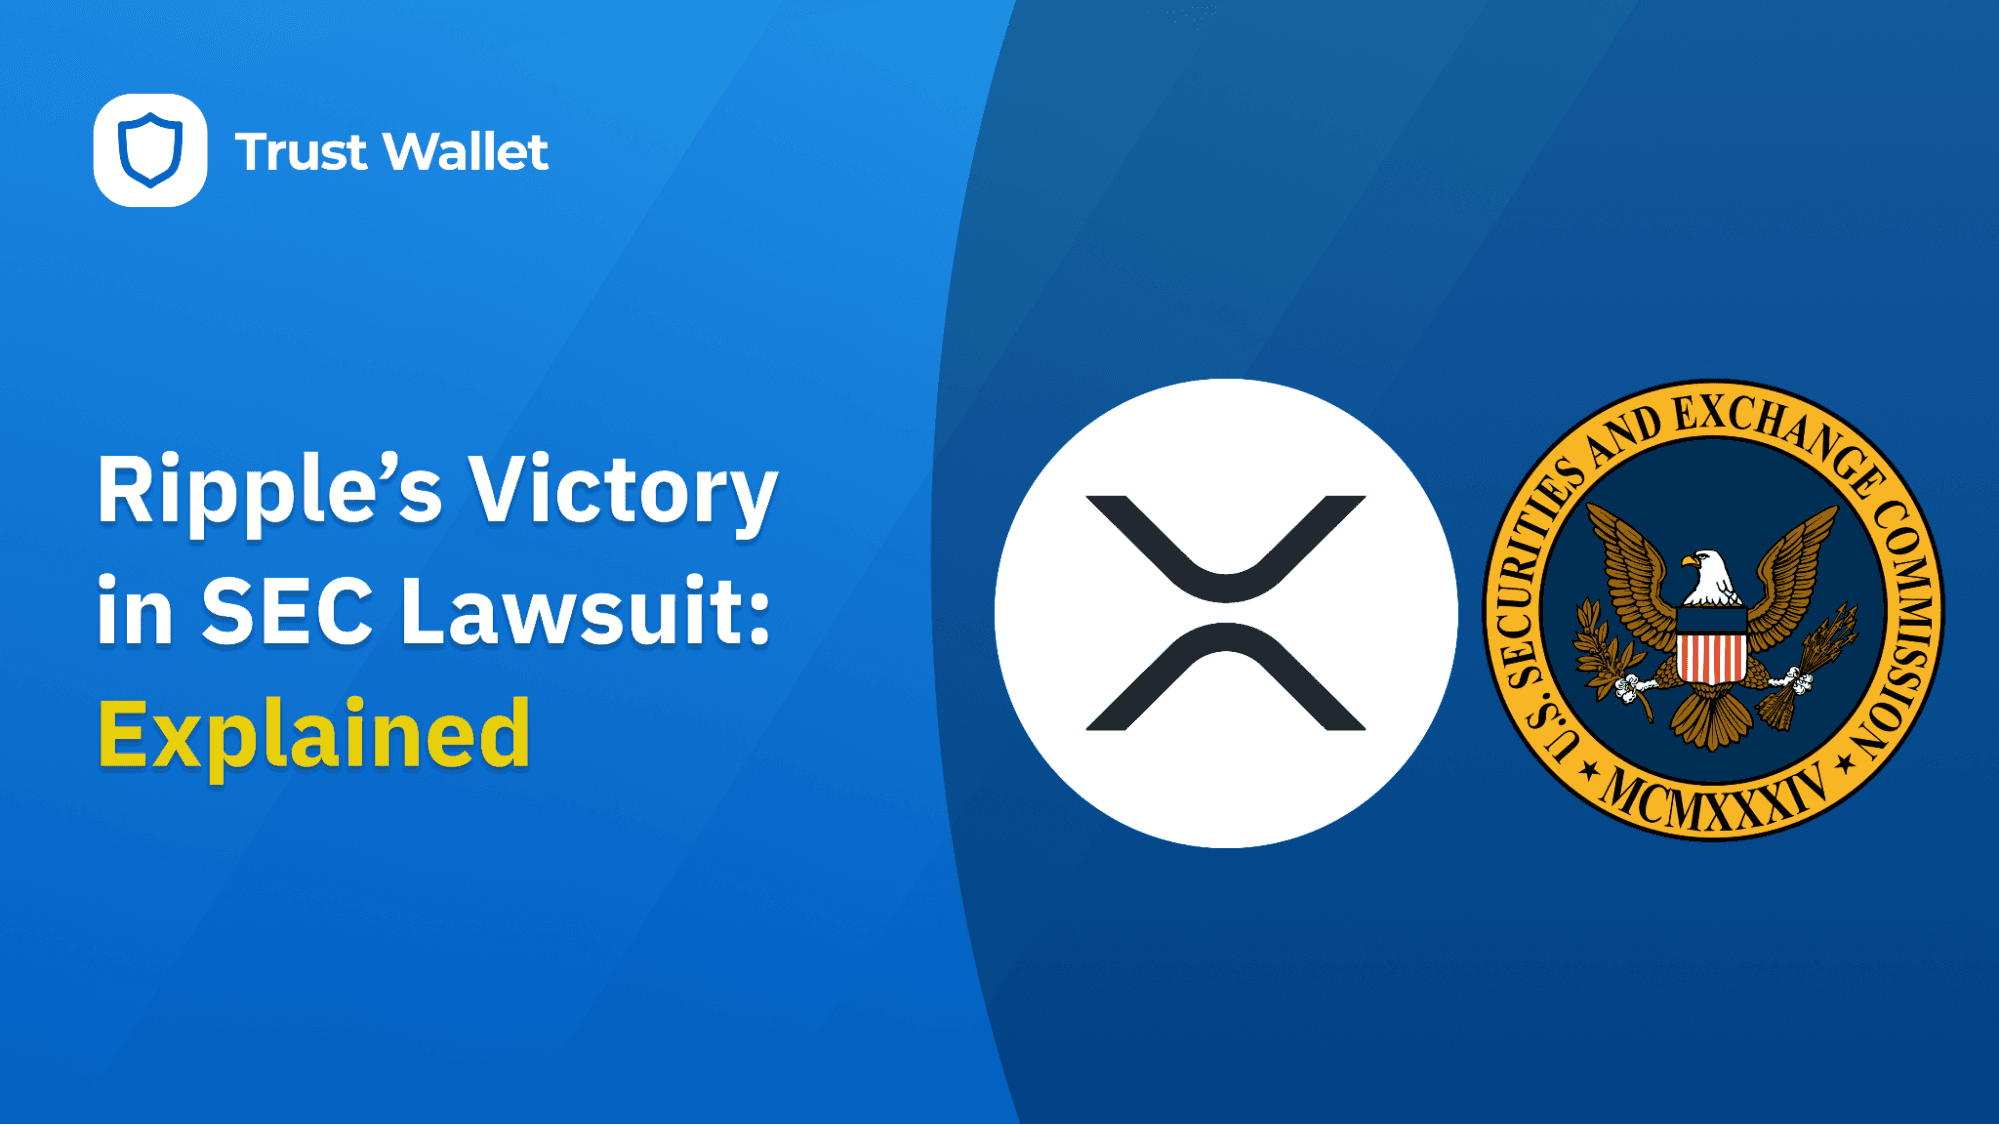 Ripple’s Victory in SEC Lawsuit: Explained